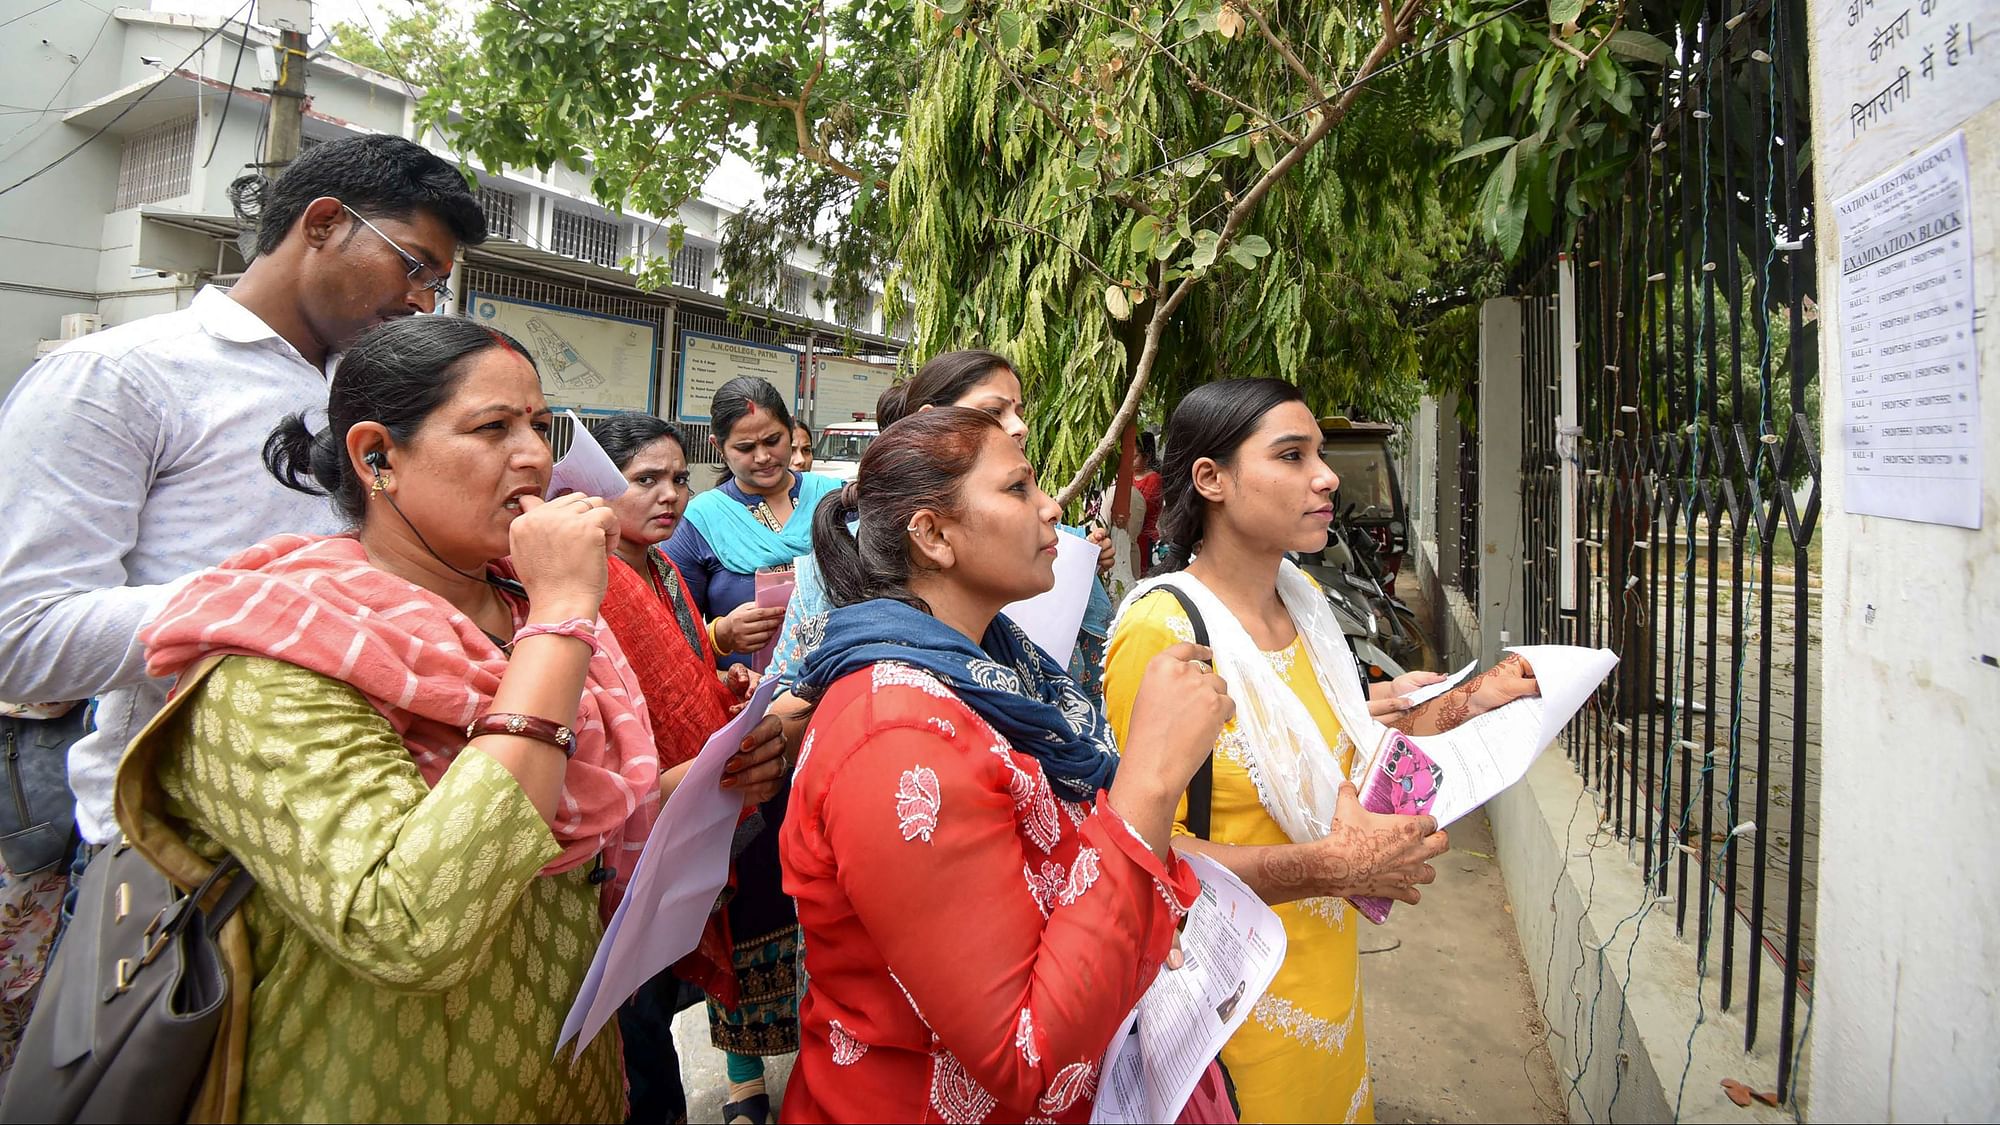 <div class="paragraphs"><p>Aspirants search their roll numbers for seats before entering an examination centre to appear in the UGC-NET exam, at AN college in Patna. The UGC-NET June 2024 exam has been cancelled due to concerns about exam integrity. A fresh exam will be scheduled, and the CBI will probe the matter, the Ministry of Education stated.</p></div>